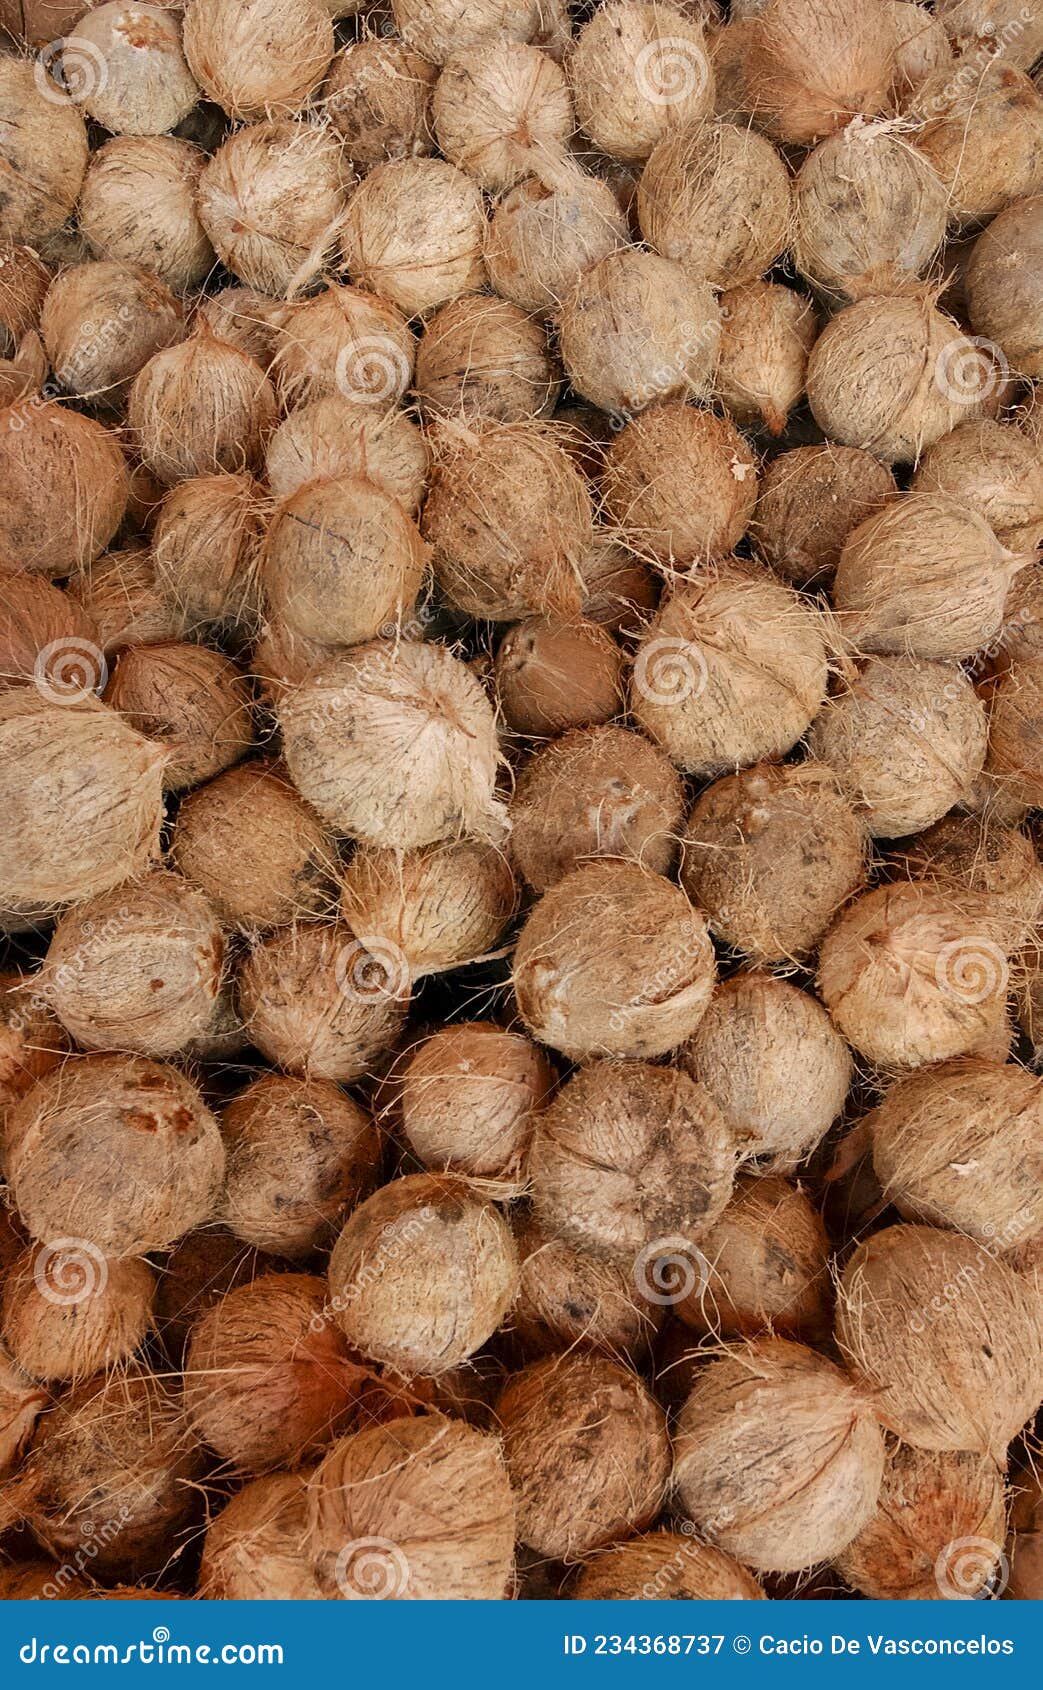 dry coconuts for industrial processing